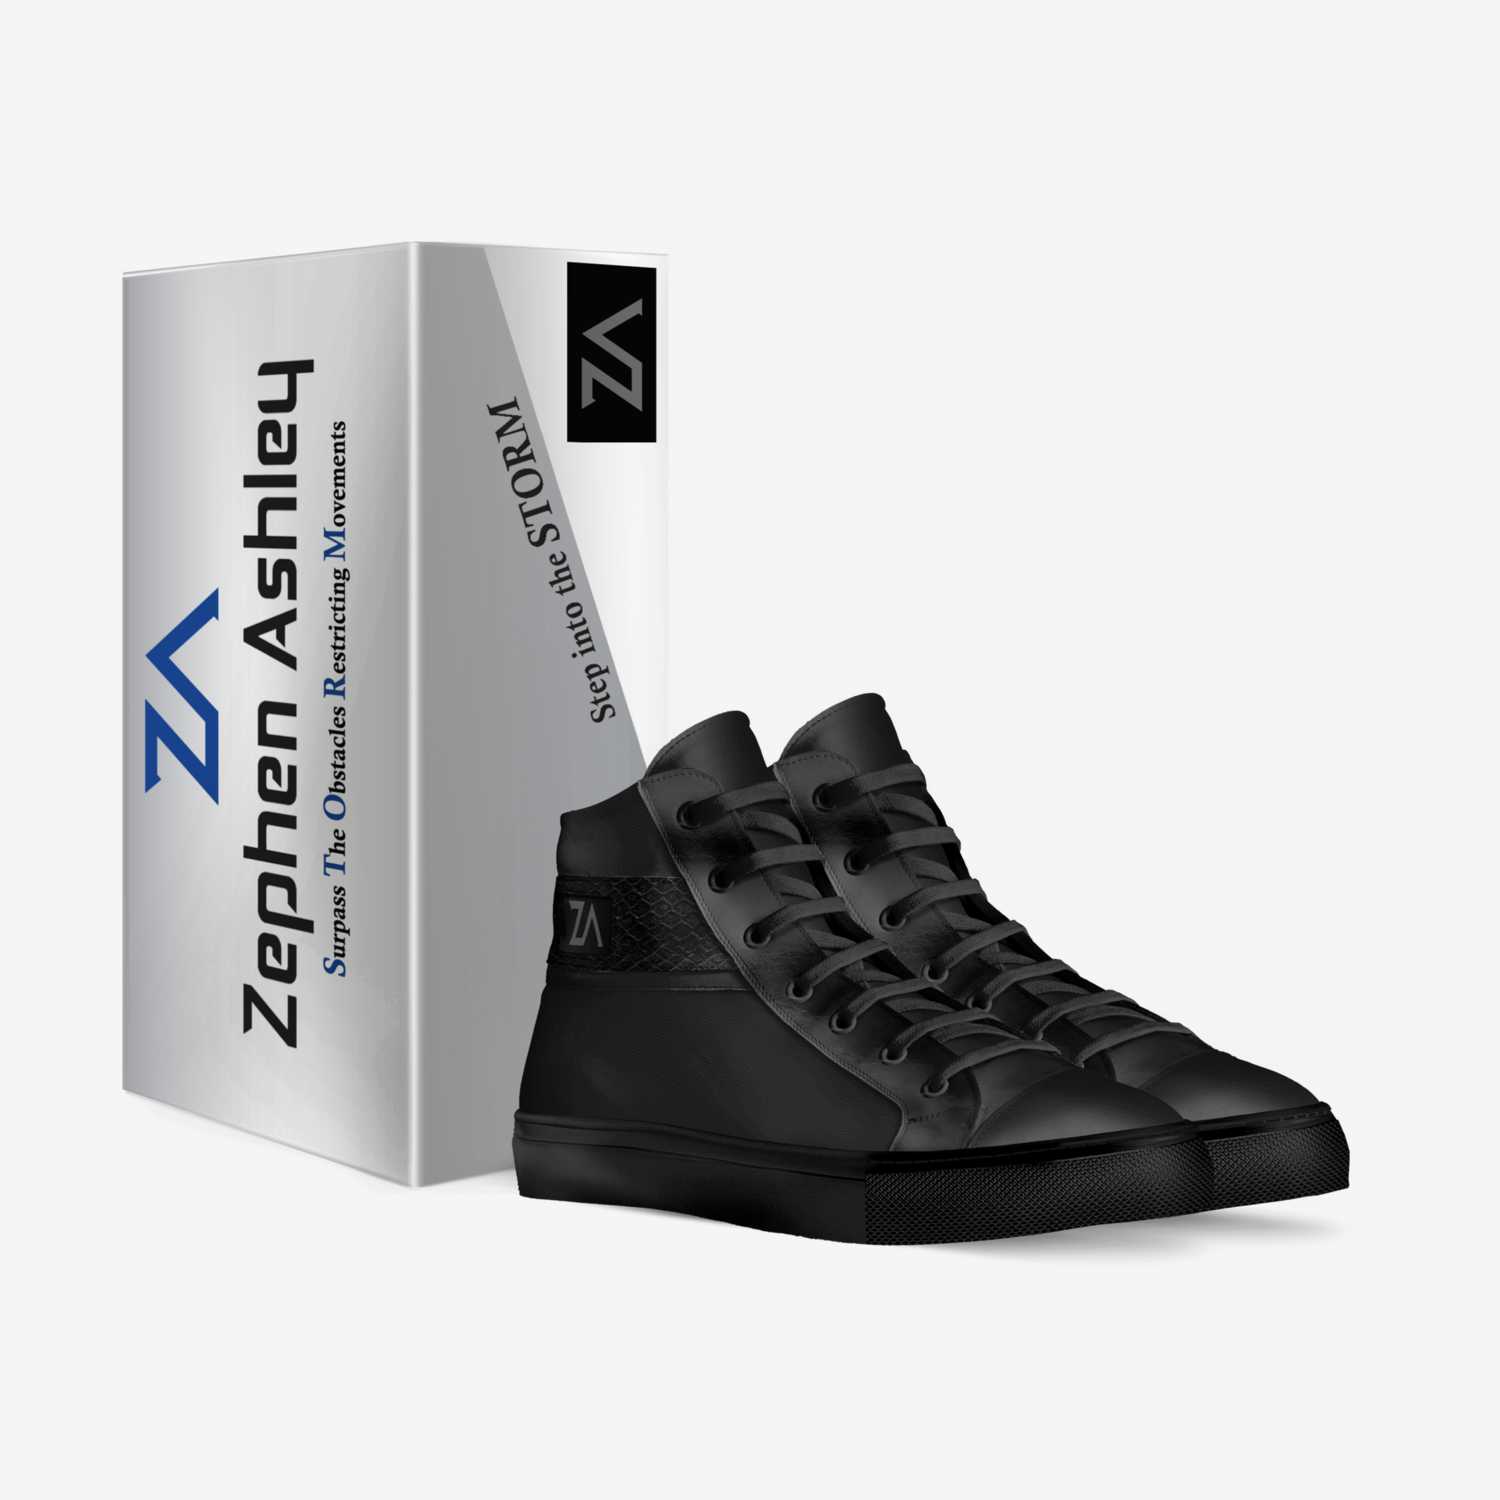 Zephen Ashley custom made in Italy shoes by Realitie Rollings | Box view